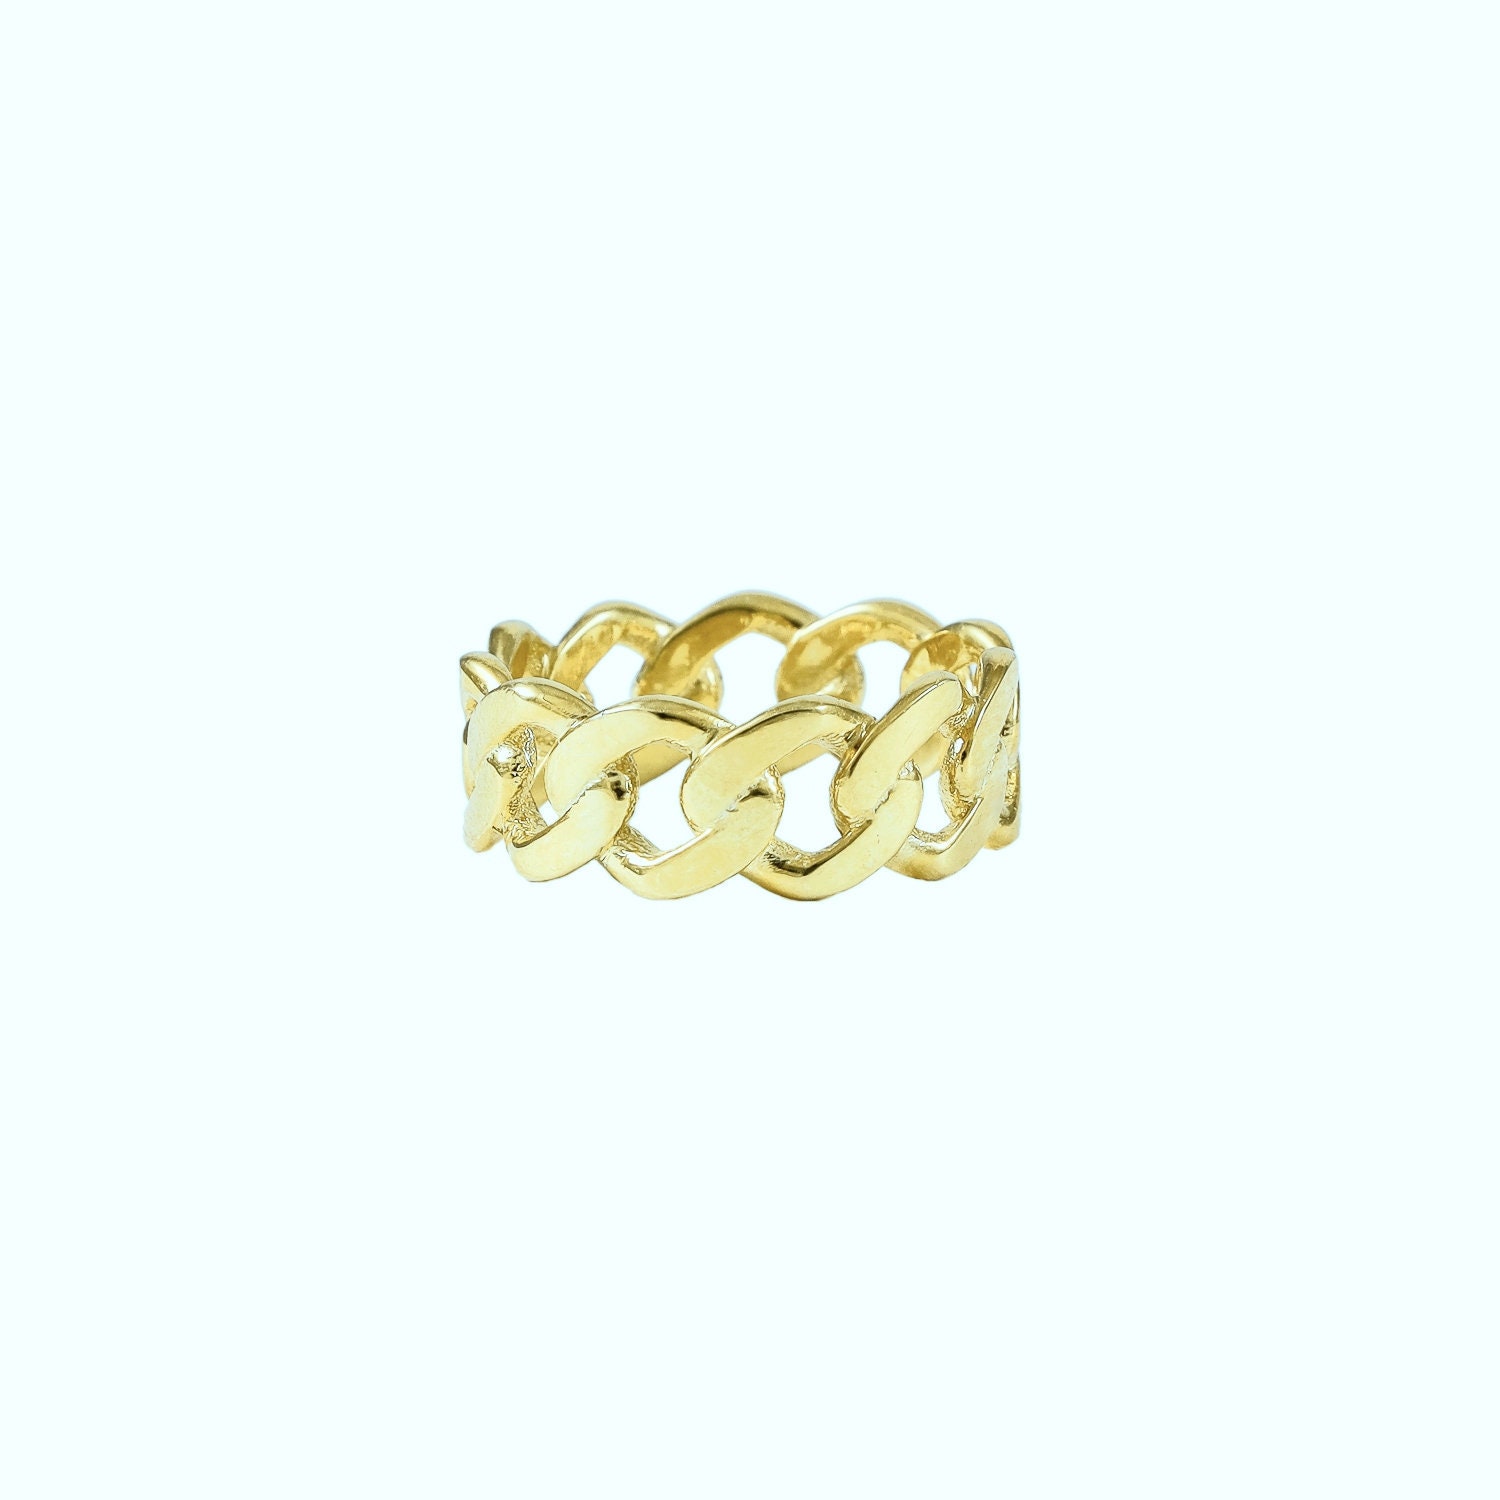 18K Gold Vermeil Chunky Chain Ring, Stacking Rings, Curb Link Statement Minimalist Jewelry, Ring For Him, 925 Unisex